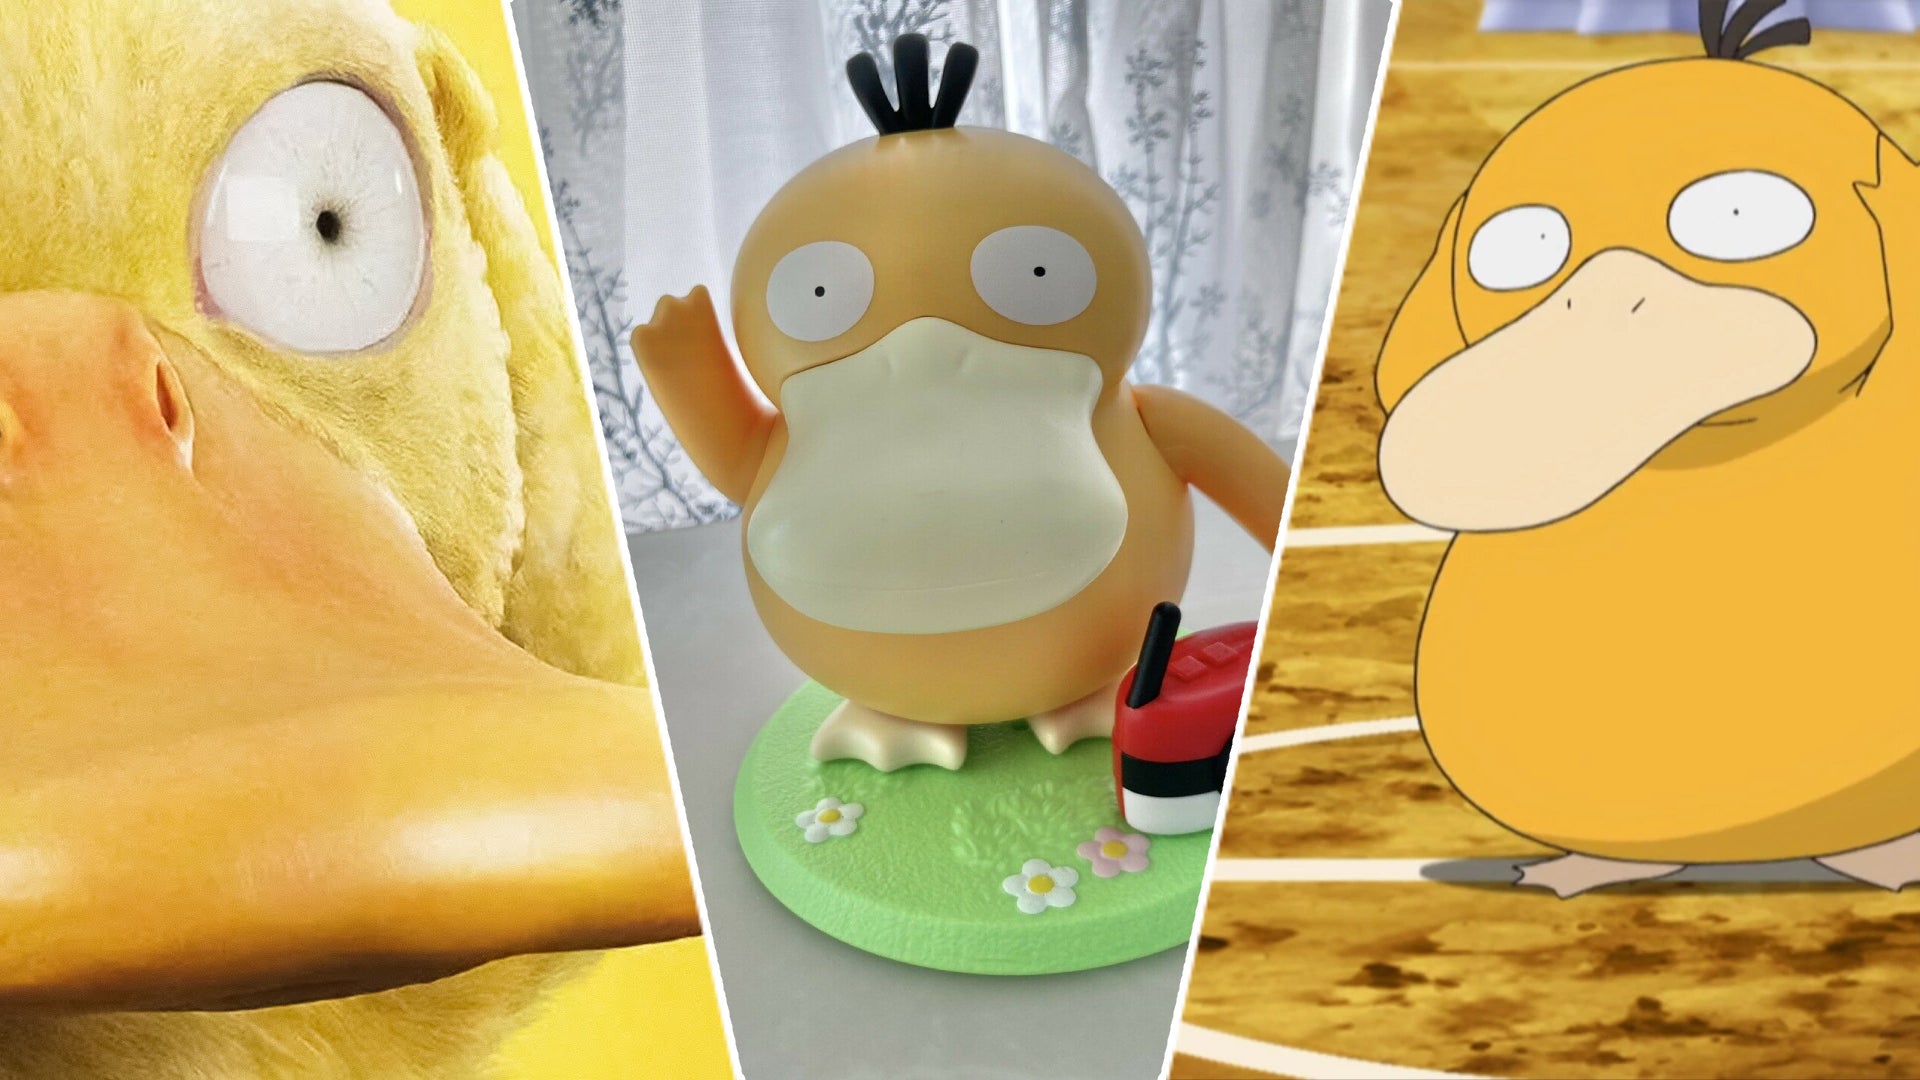 Image for KFC China's dancing Psyduck toy is an inspiration to us all, and it's making bank